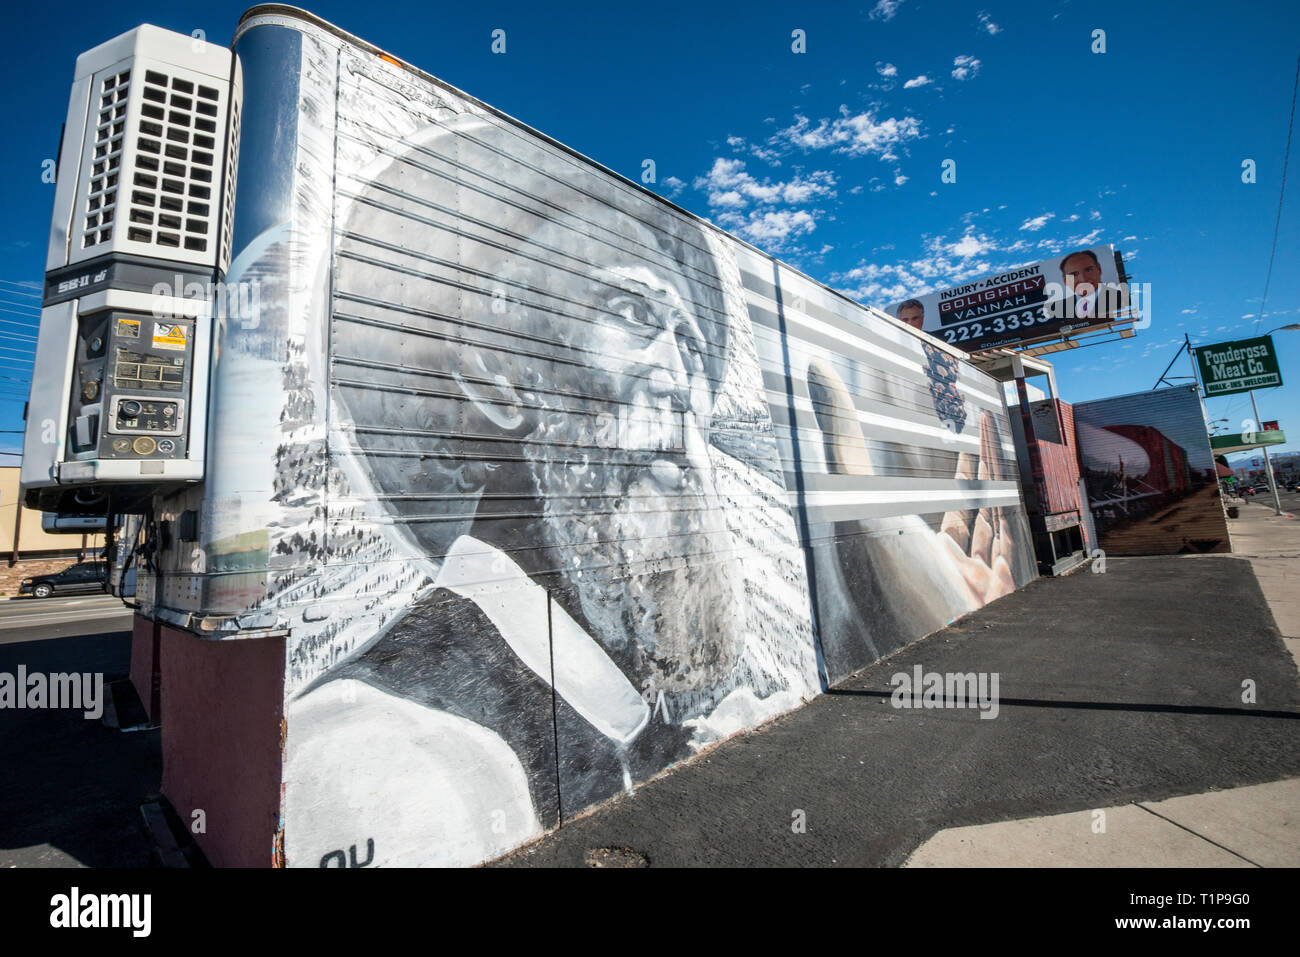 A mural is painted on the side of a building in the midtown district of Reno, Nevada. Stock Photo